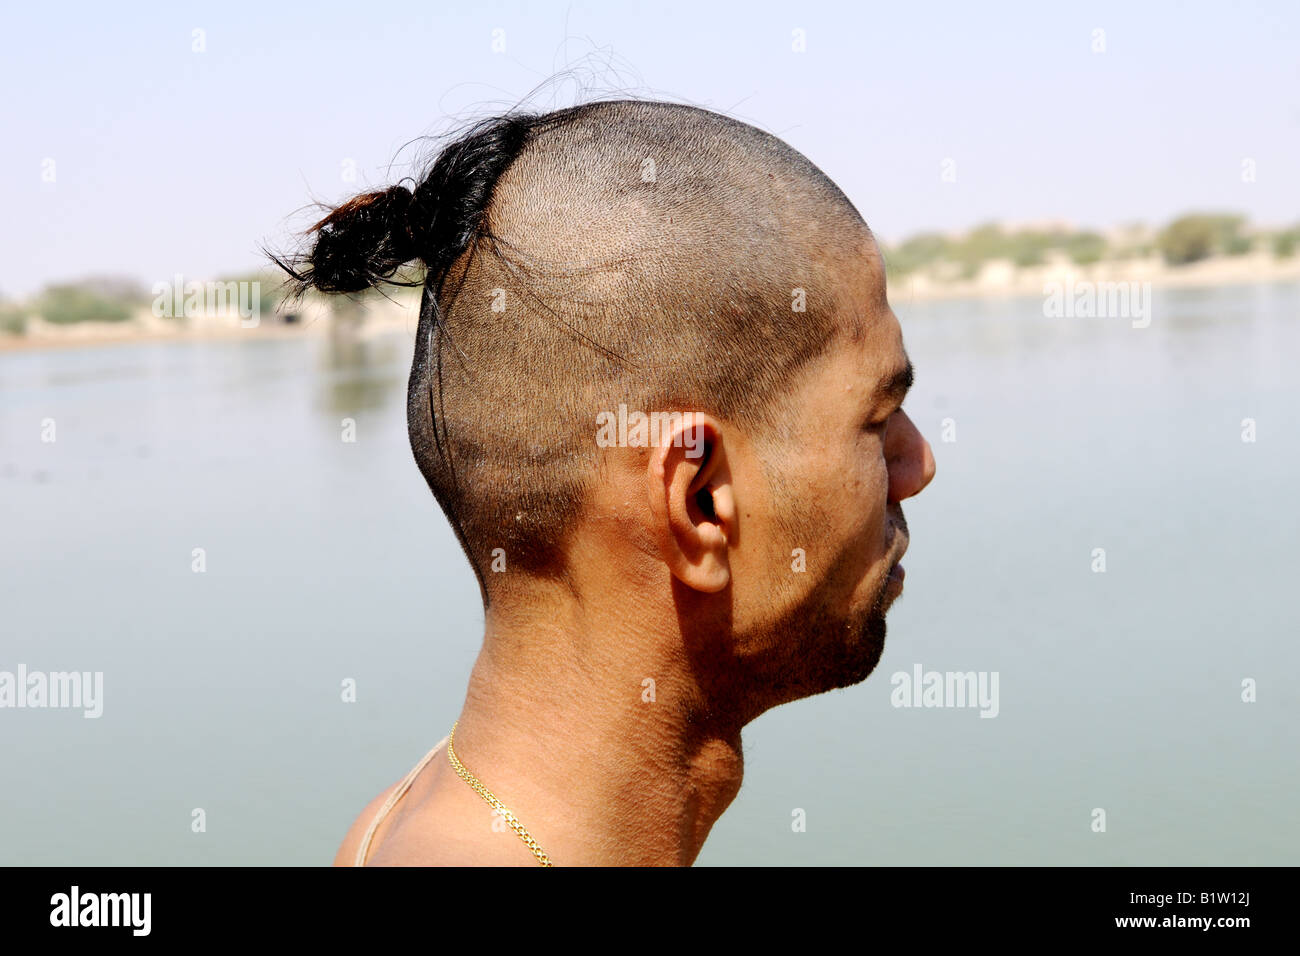 A Brahmin man shows his shaved head. Rajasthan,India Stock Photo